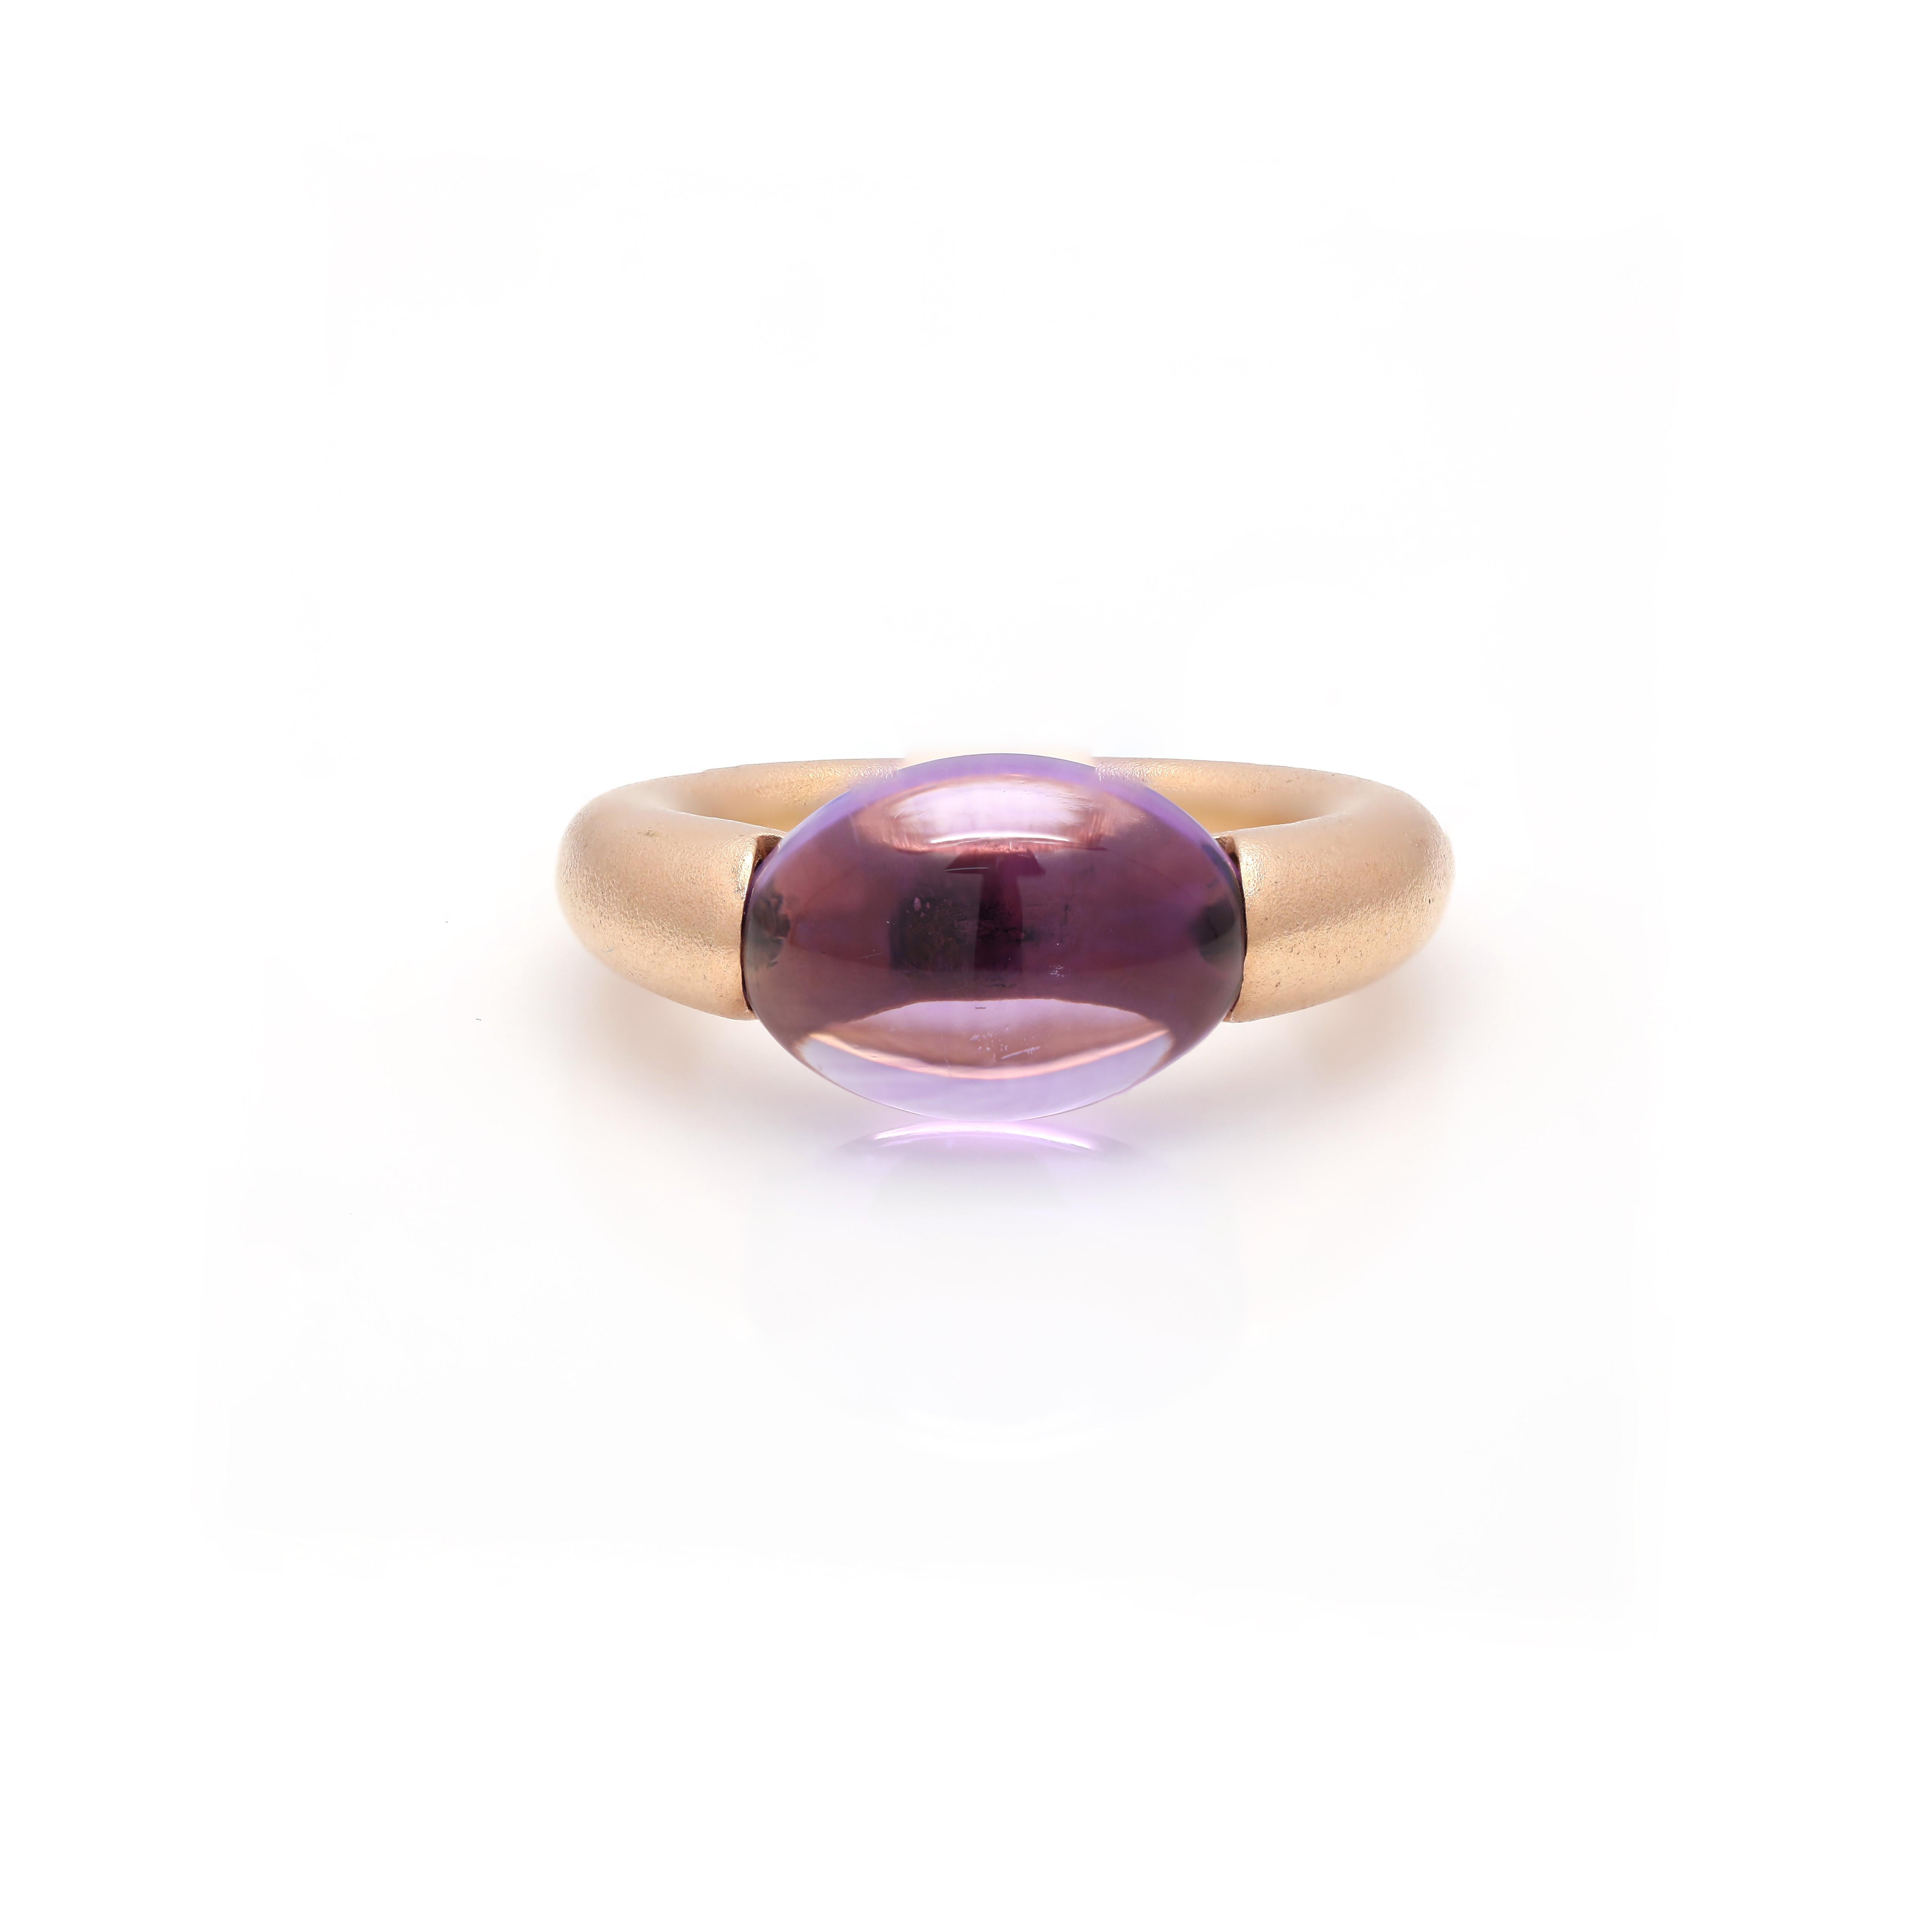 For Sale:  5.88 Carat Bubble Amethyst Ring Handcrafted in 14K Solid Rose Gold 3